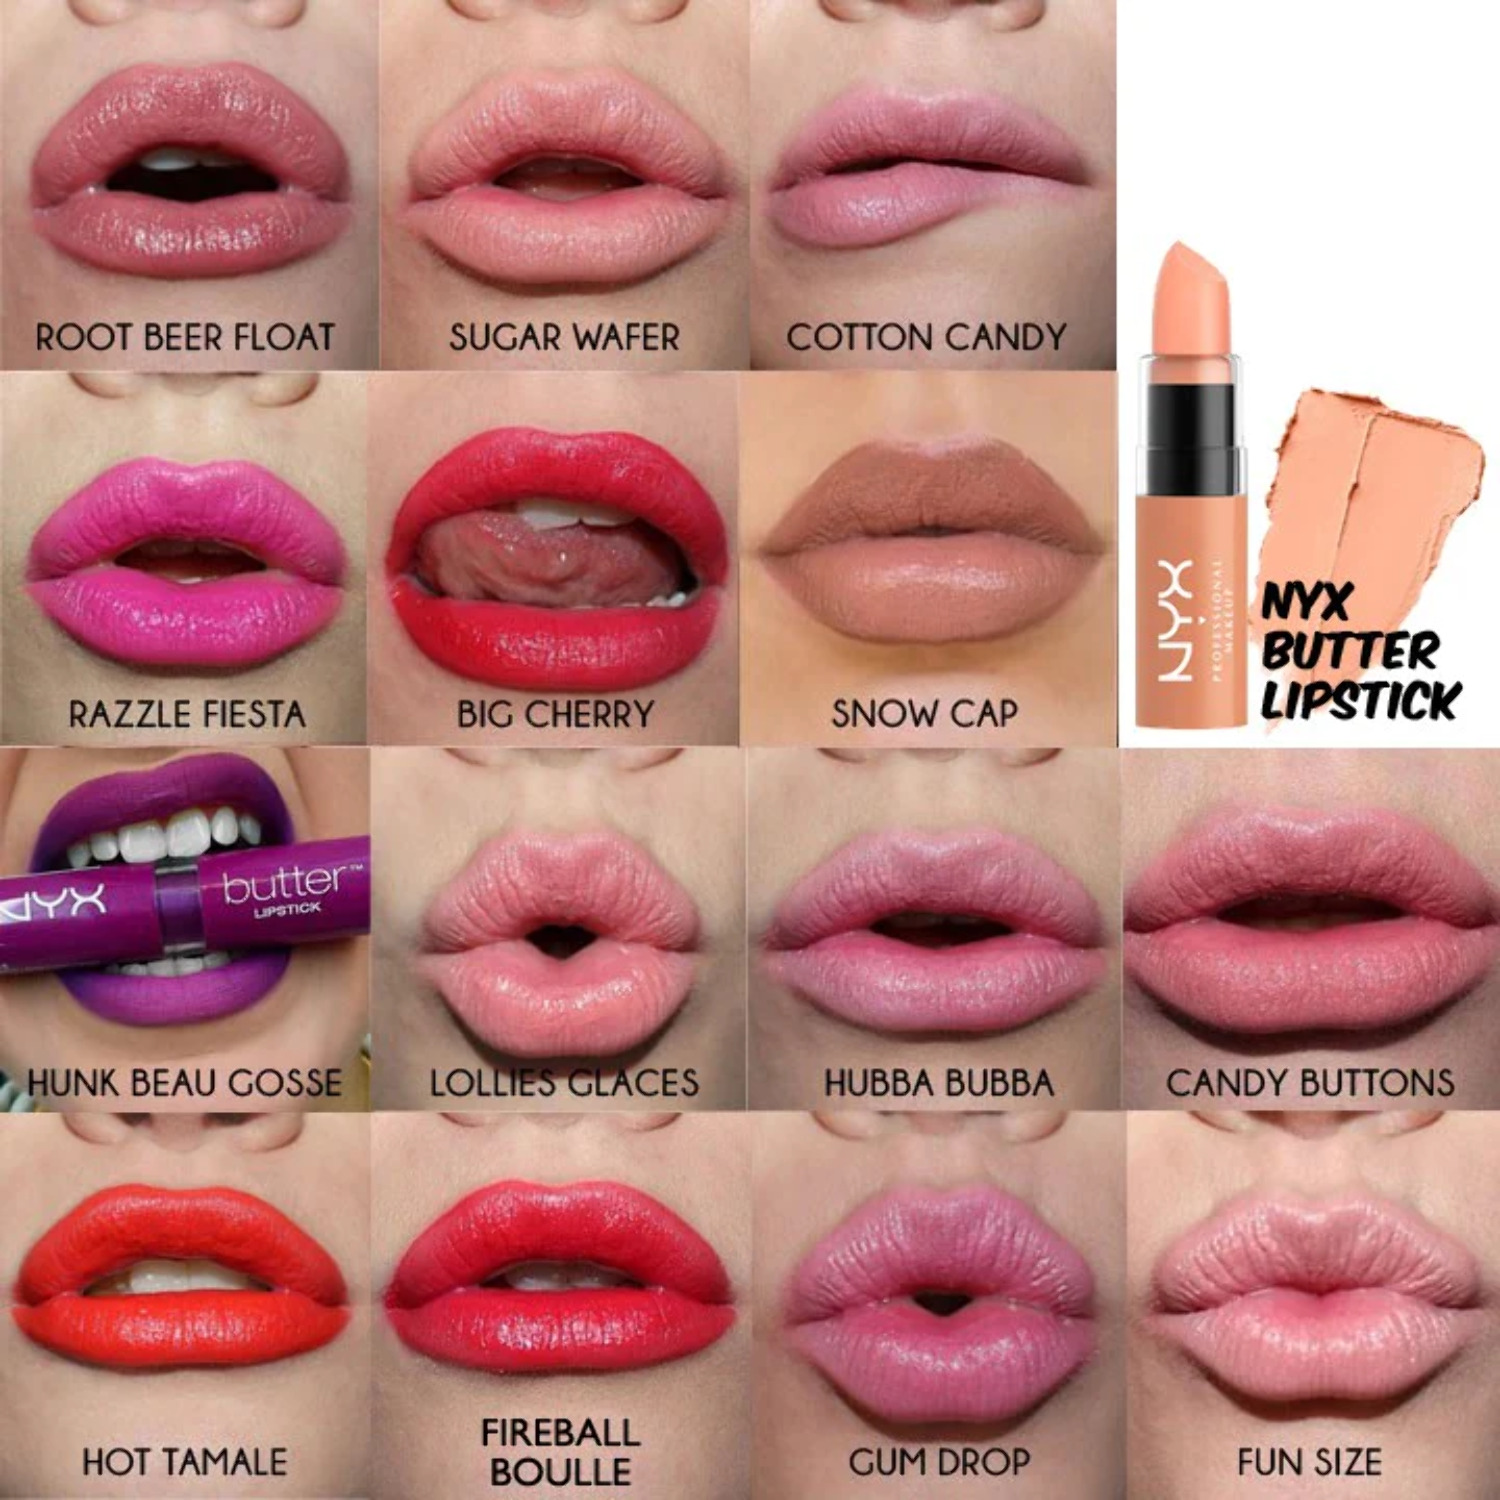 NYX Professional Makeup Butter Lipstick, Staycation - image 5 of 5